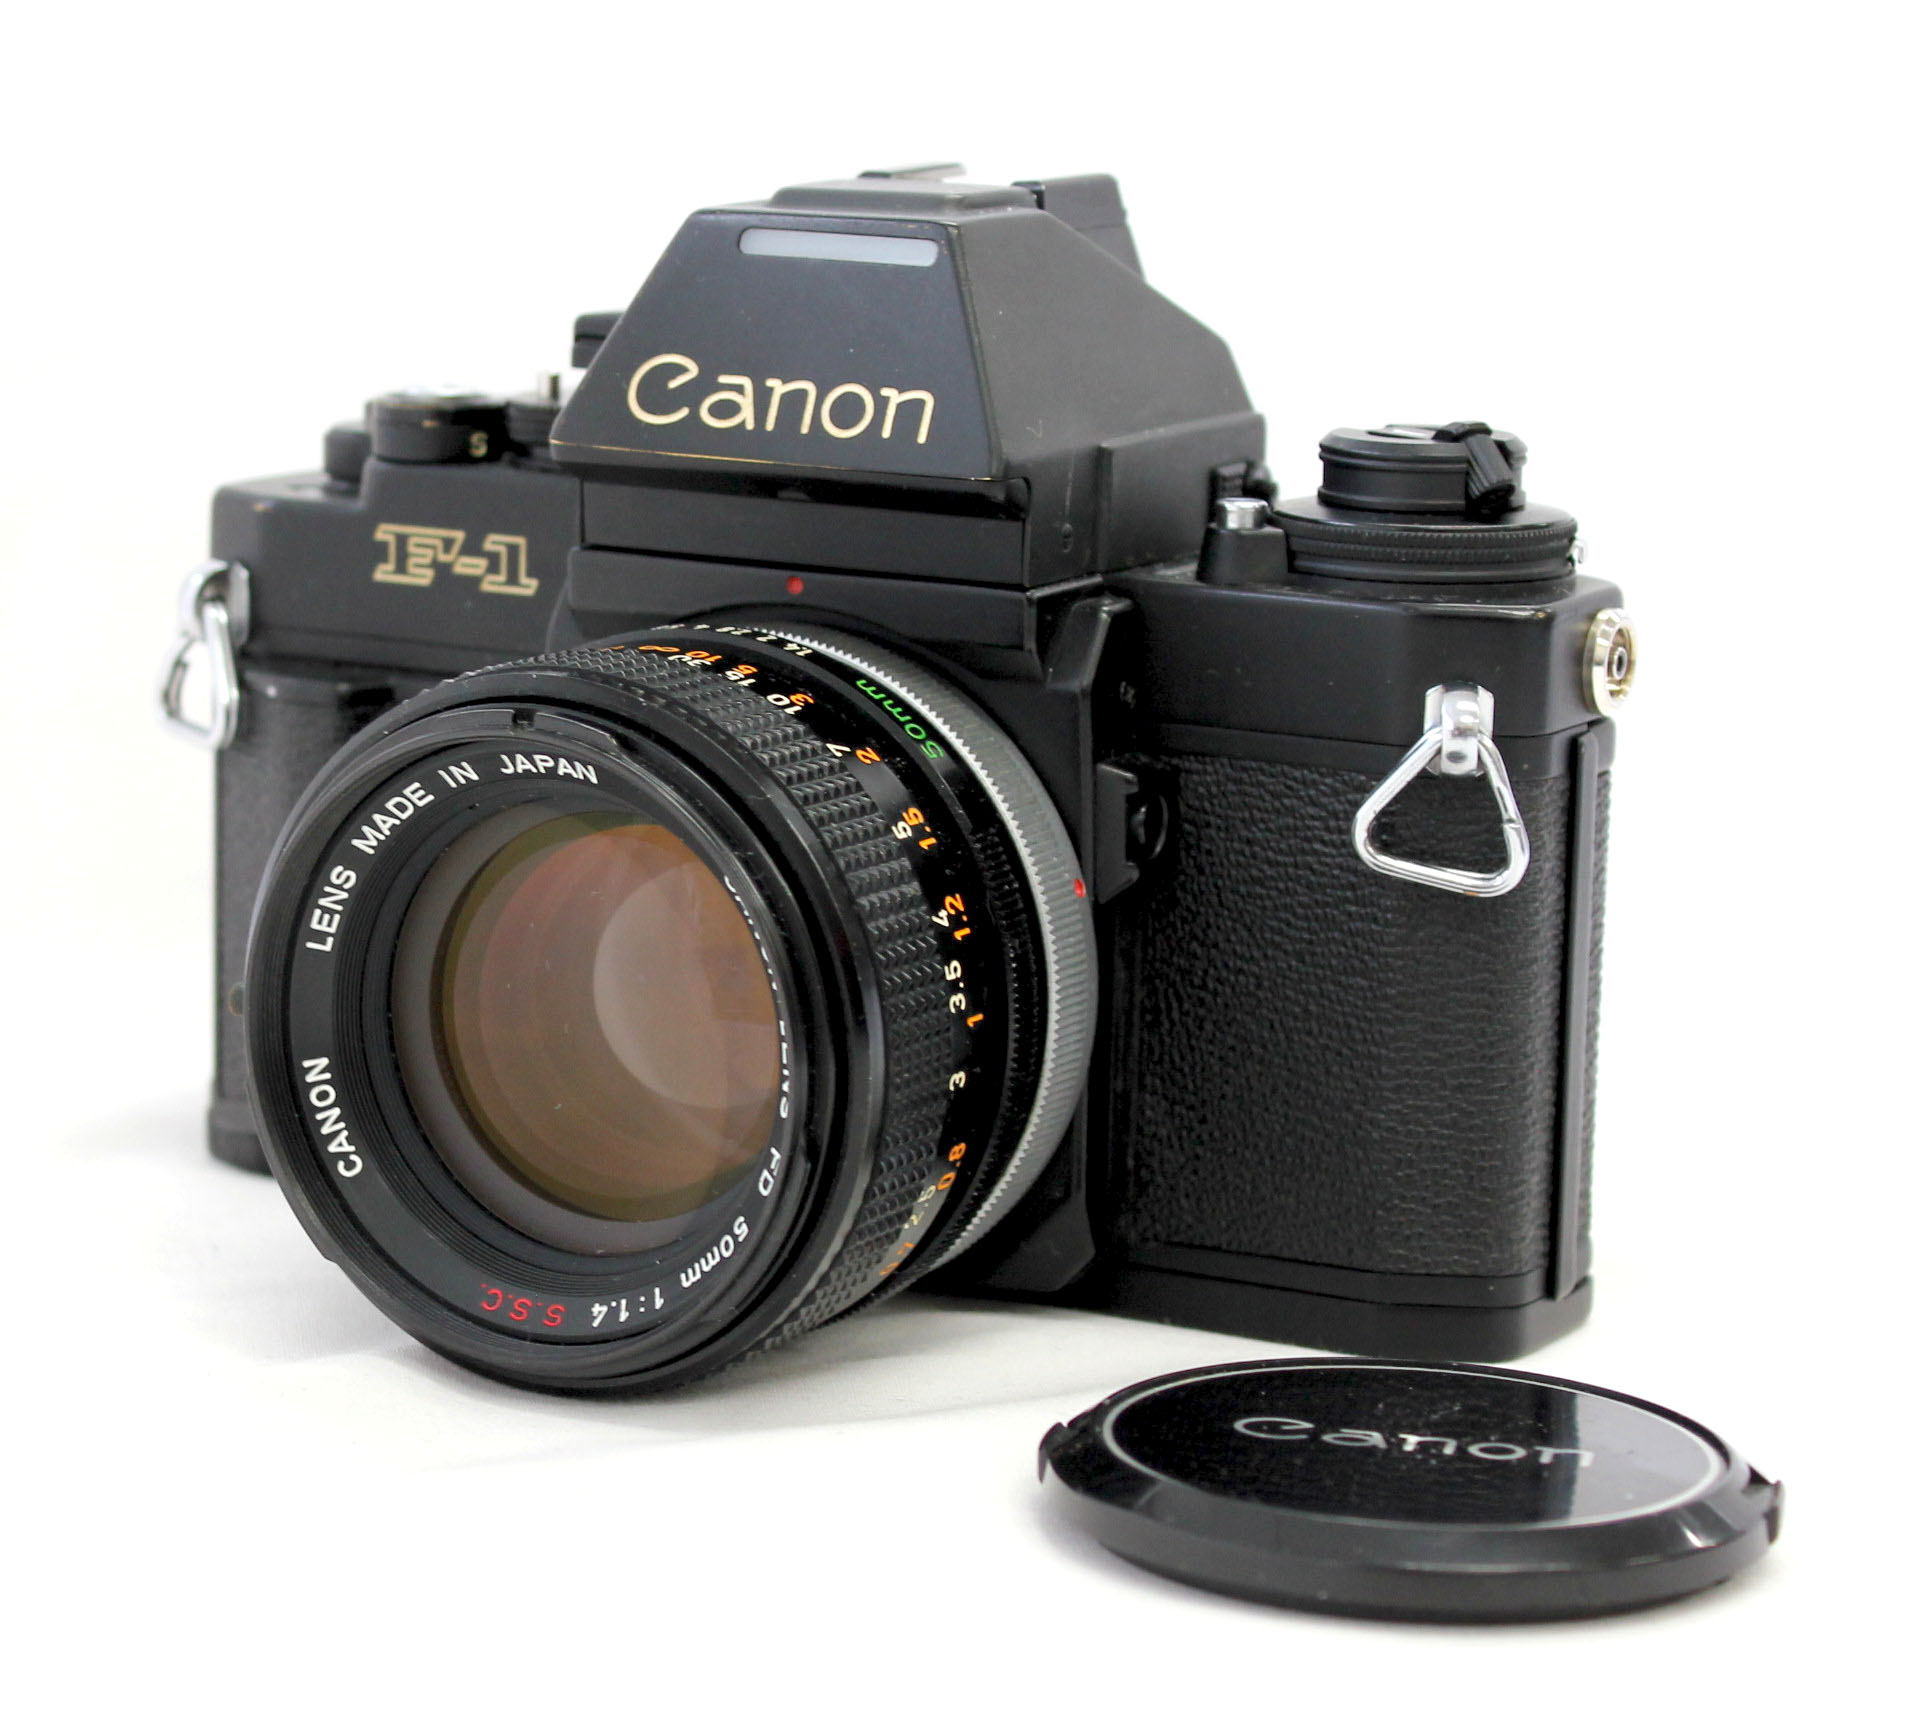 [CLA'd] Canon New F-1 AE Finder 35mm SLR Film Camera with FD 50mm F/1.4 S.S.C. Lens from Japan